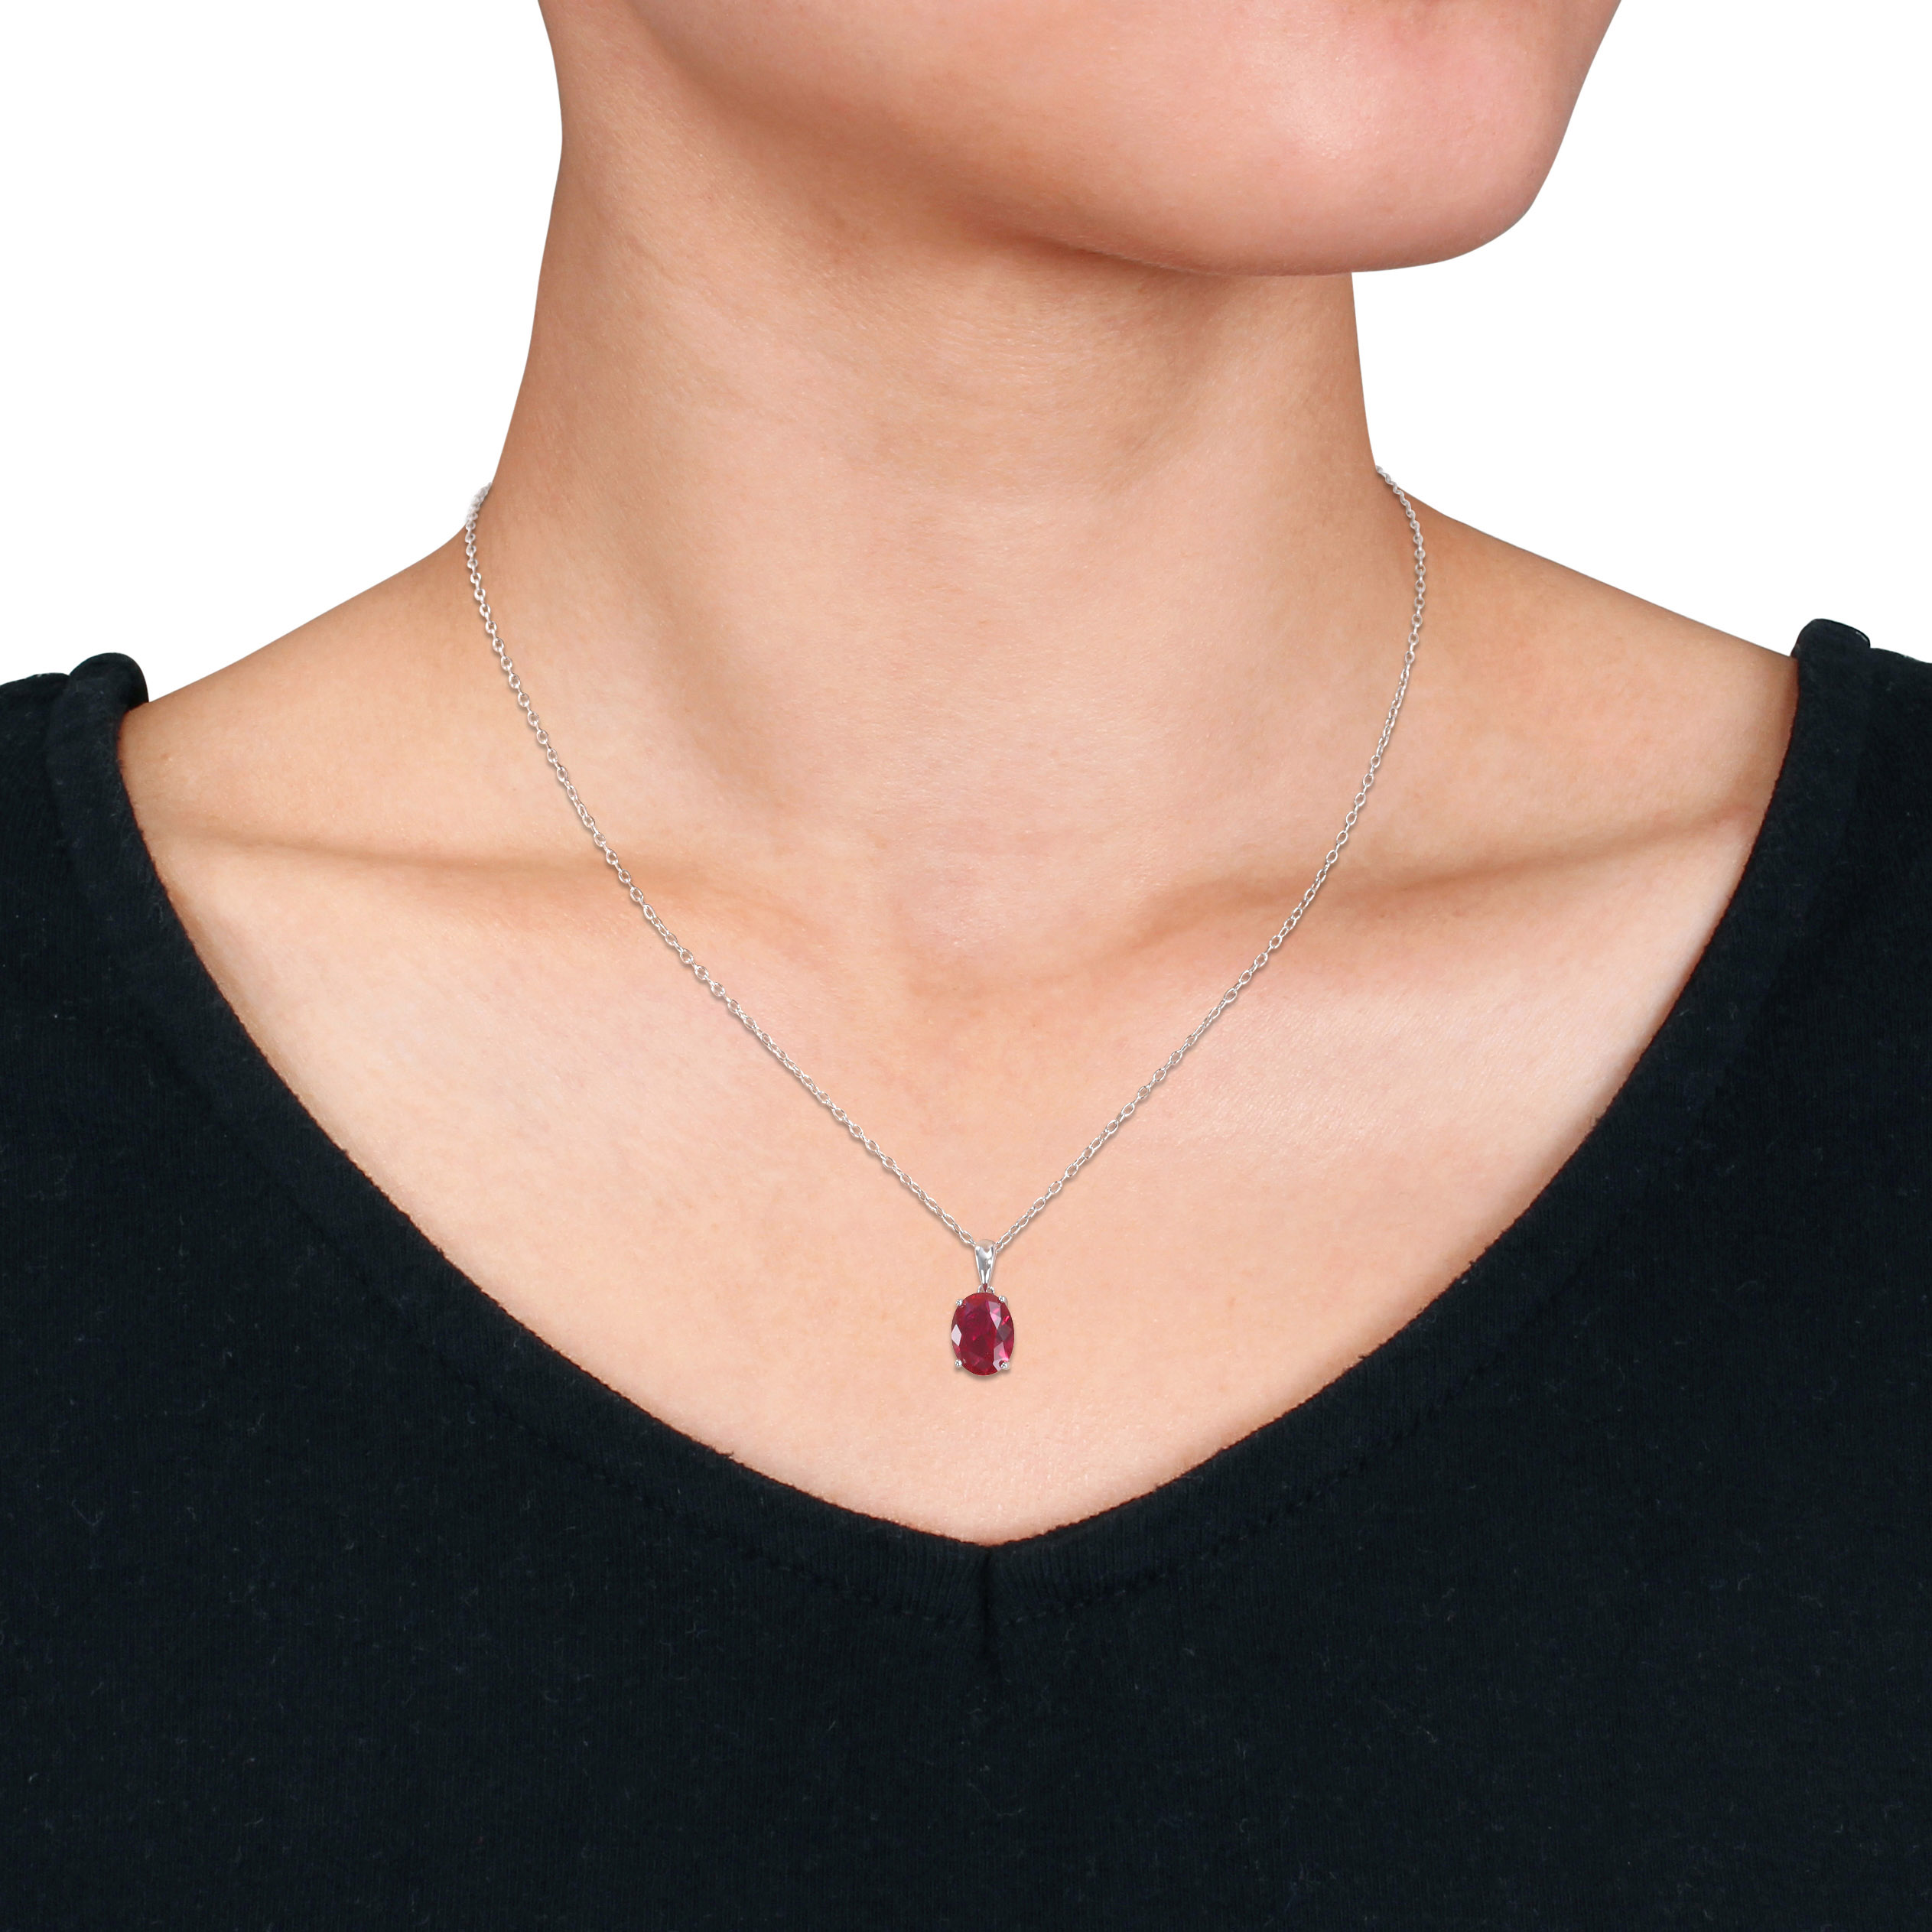 3 CT TGW Oval Created Ruby Solitaire Heart Design Pendant with Chain in Sterling Silver - 18 in.